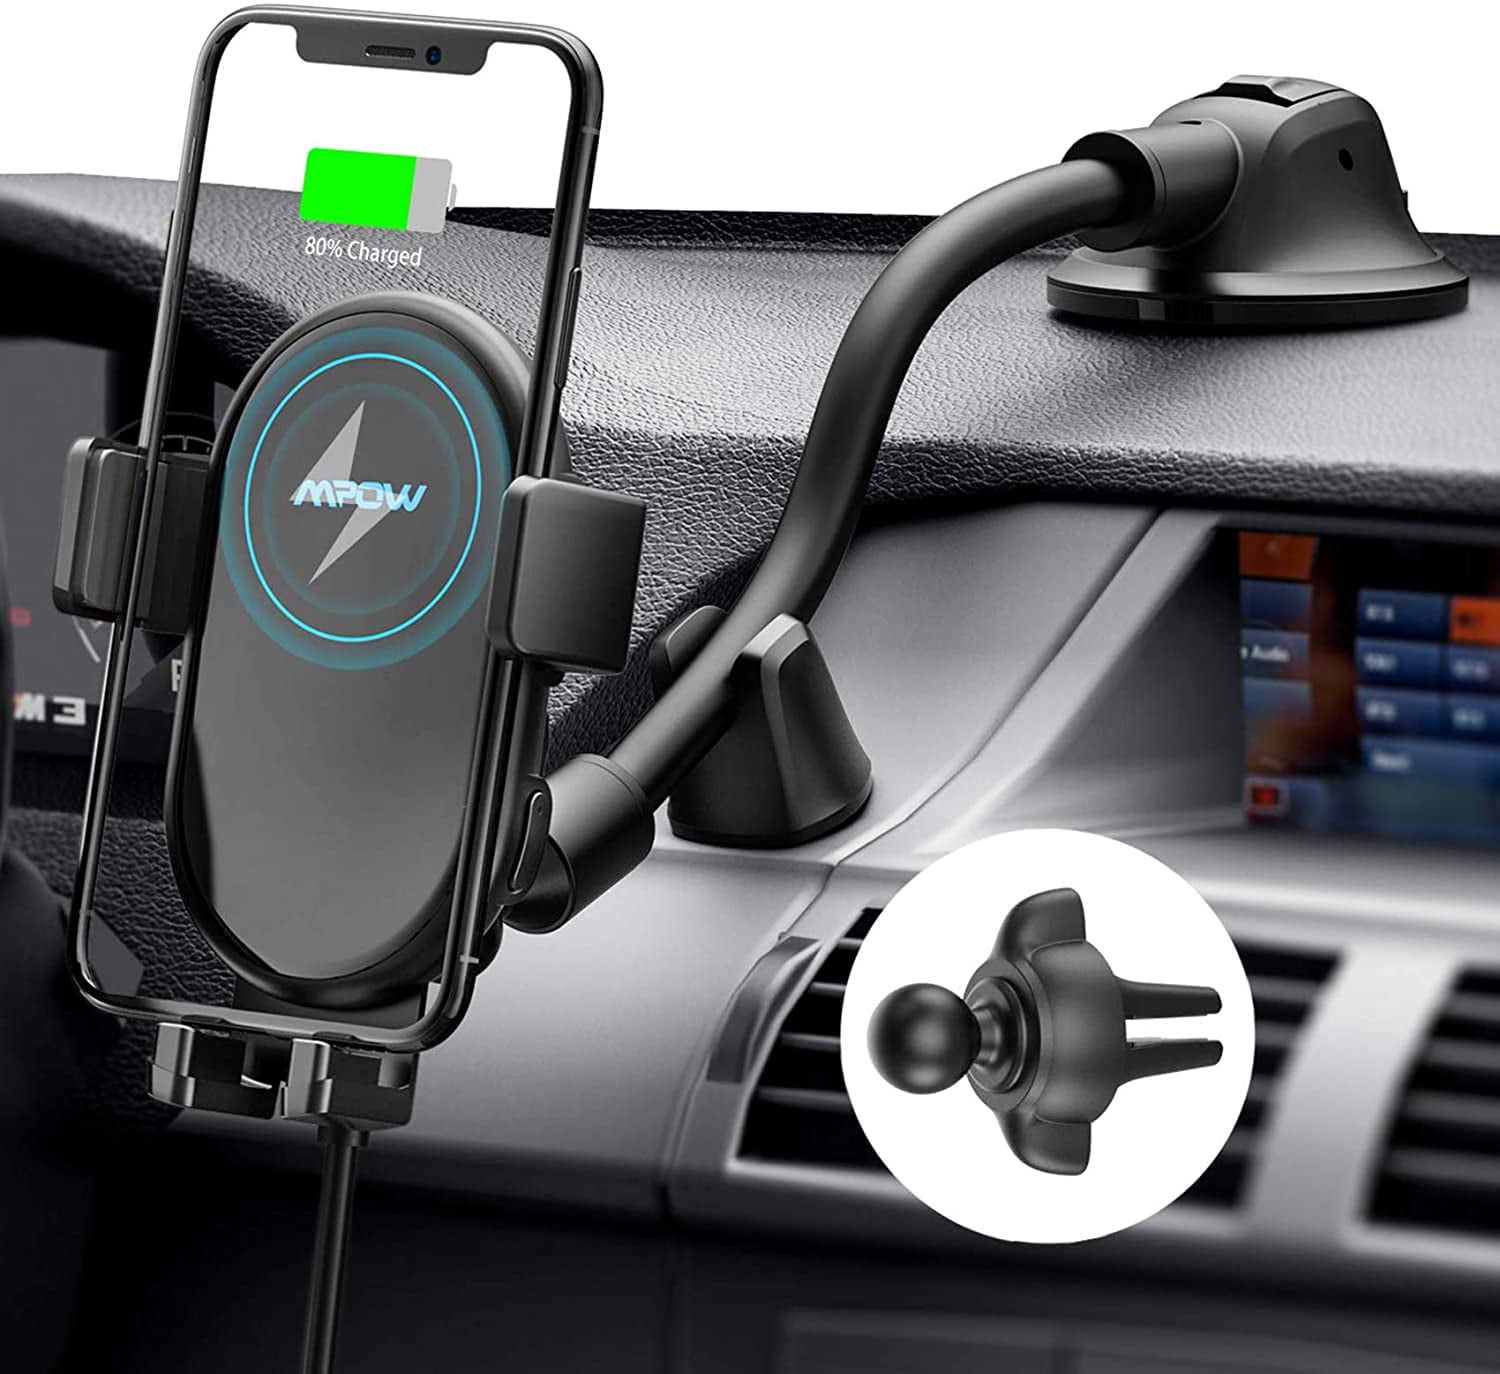 5W Auto Clamping Phone Holder for Dashboard Windshield Compatible with iPhone Xs Max/XS/XR/8 Plus Samsung Galaxy S10/S9/S8/S7 Edge/Note5 & Other Qi Smartphone Vech Wireless Car Charger Mount